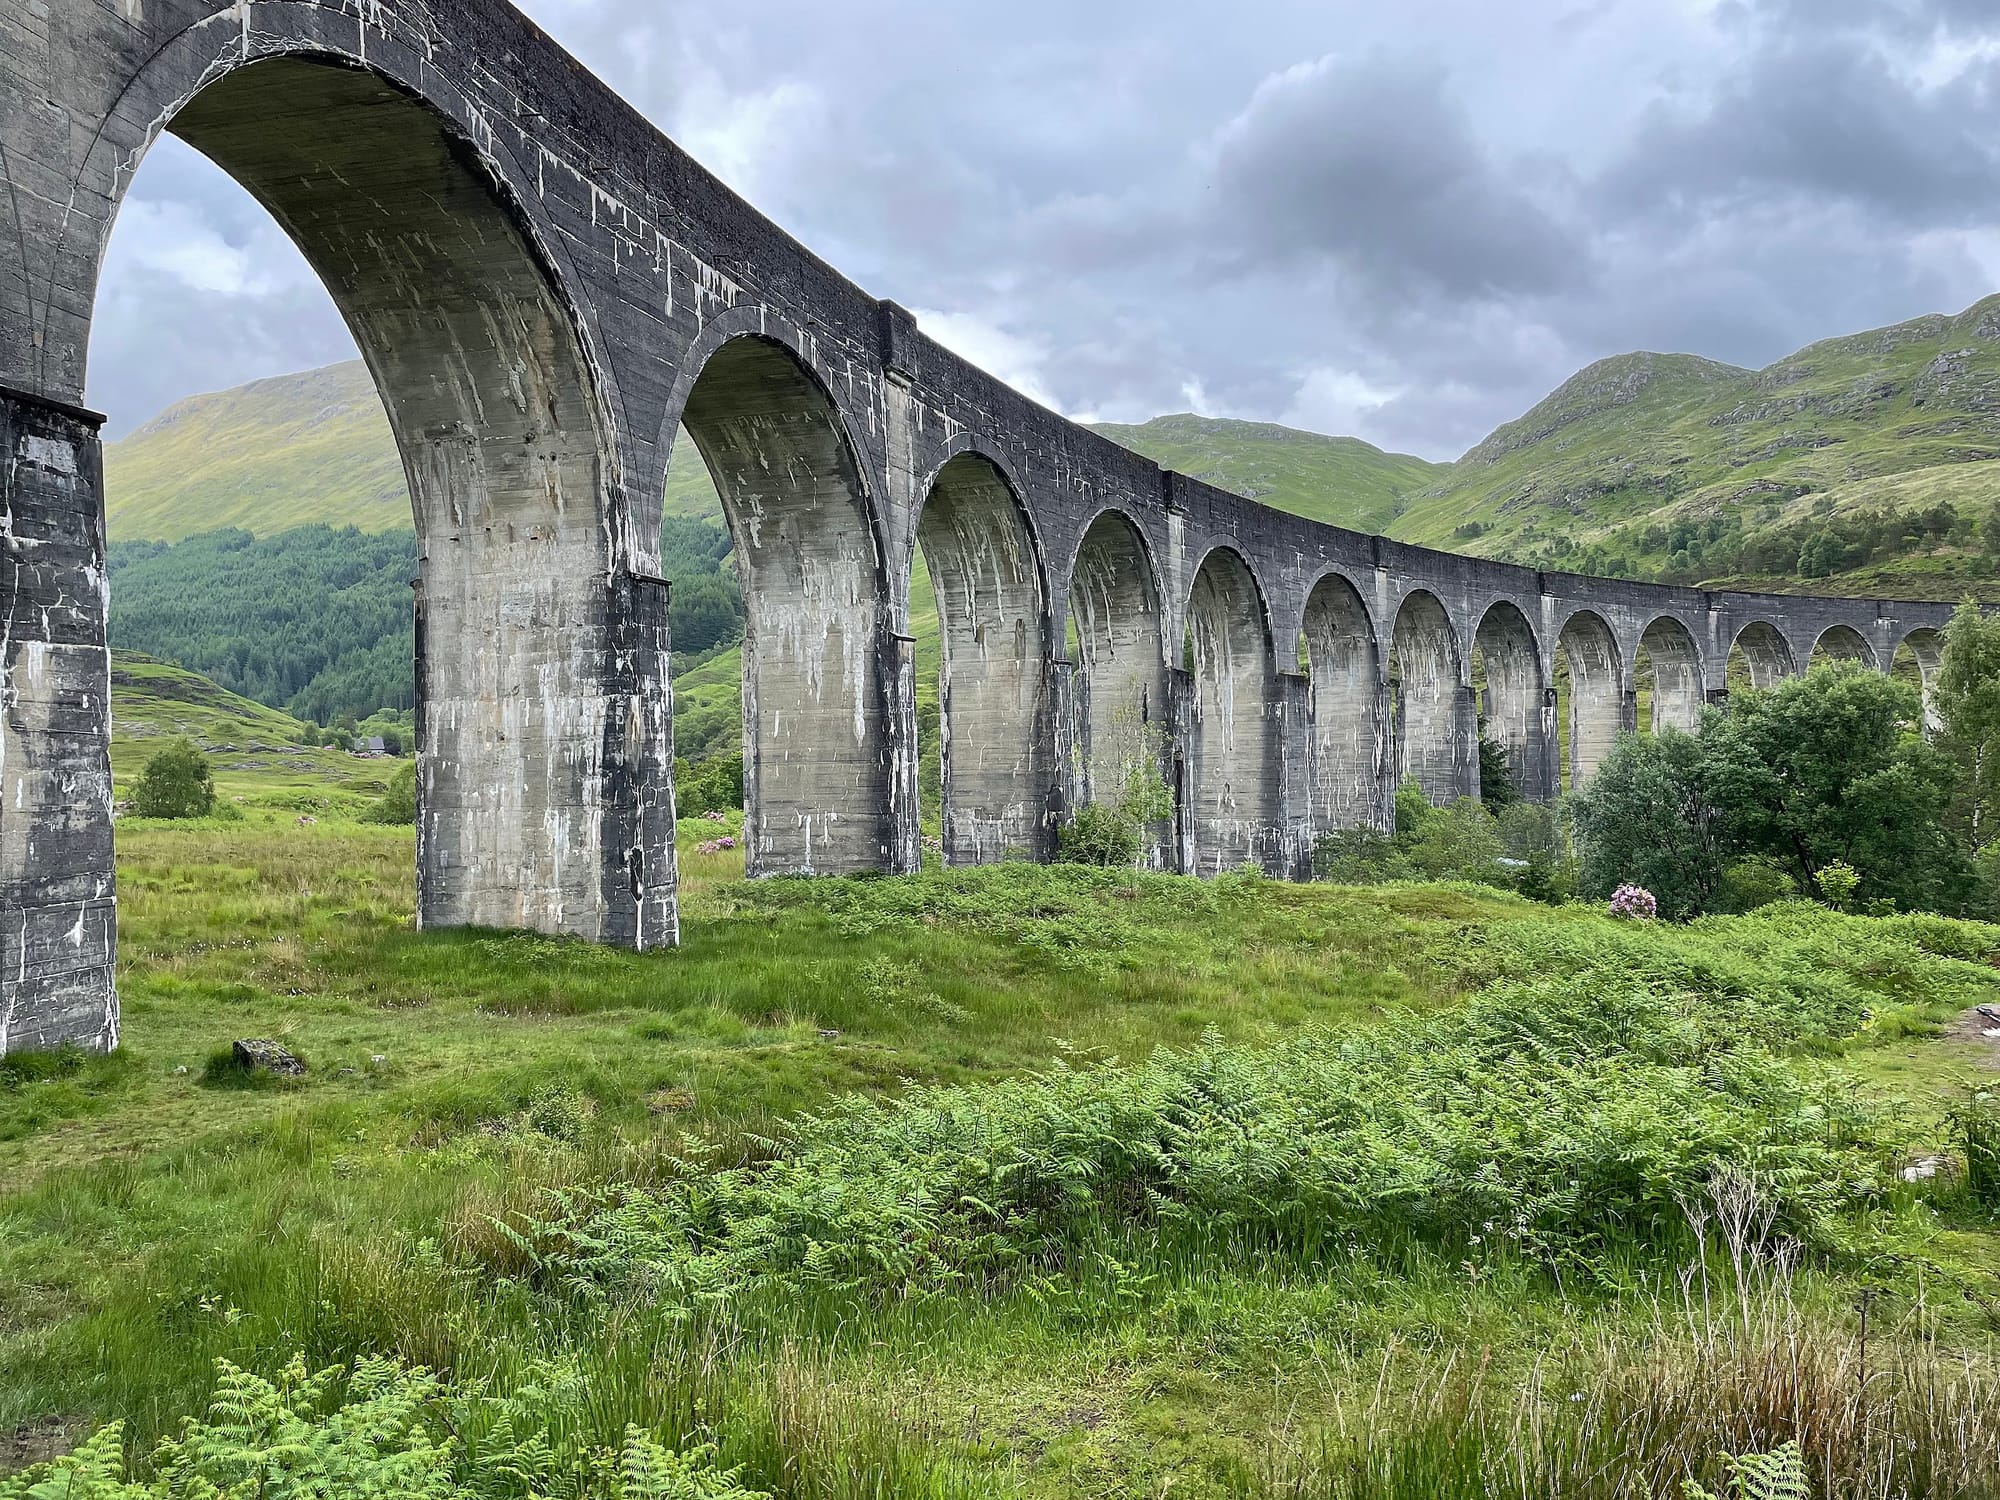 £3.4 Million Investment Secured for Glenfinnan Viaduct